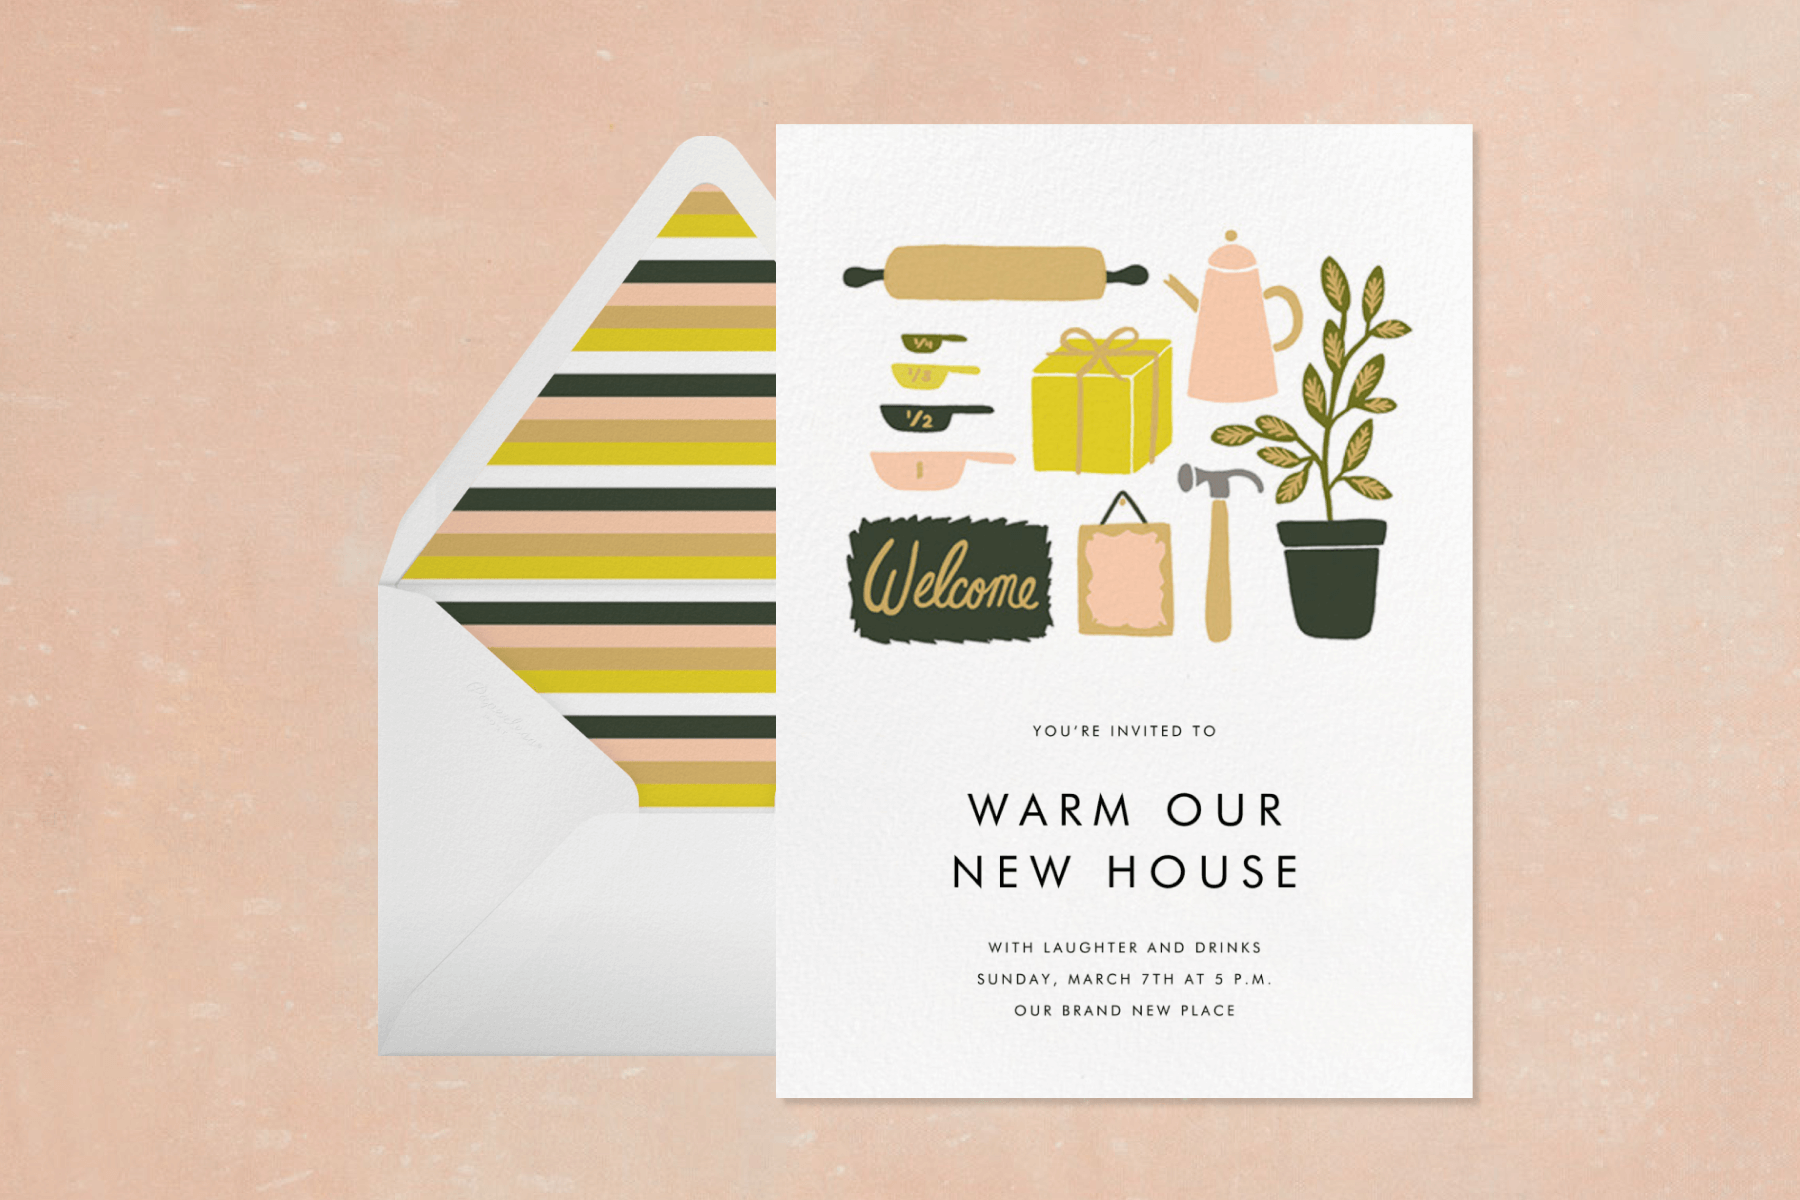 An invitation reads “Warm our new house” with illustrations of a rolling pin, potted plant, welcome mat, measuring cups, a hammer, frame, tea kettle, and wrapped gift in shades of yellow, dark green, pink, and camel.